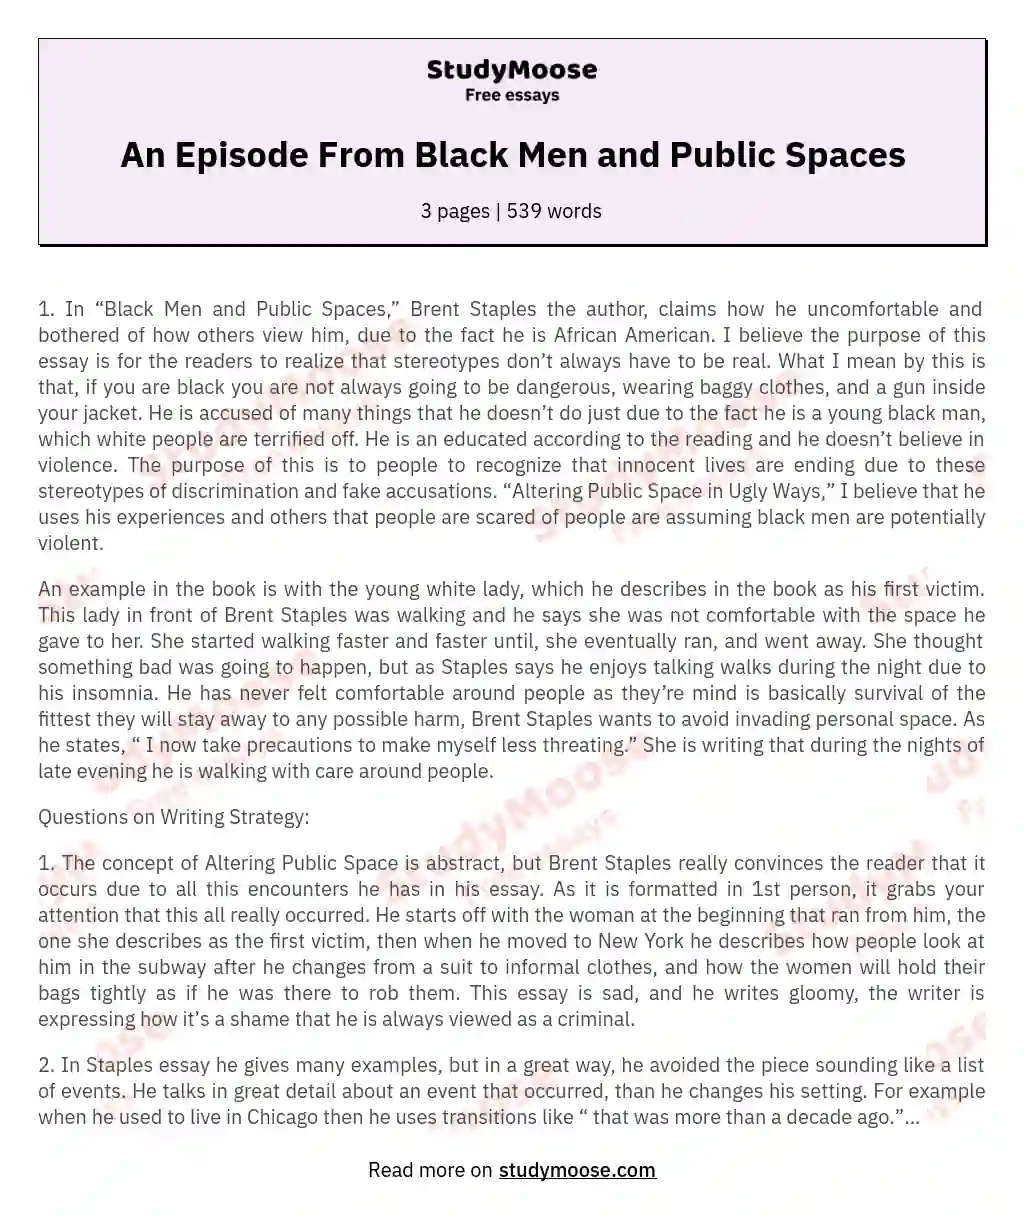 An Episode From Black Men and Public Spaces